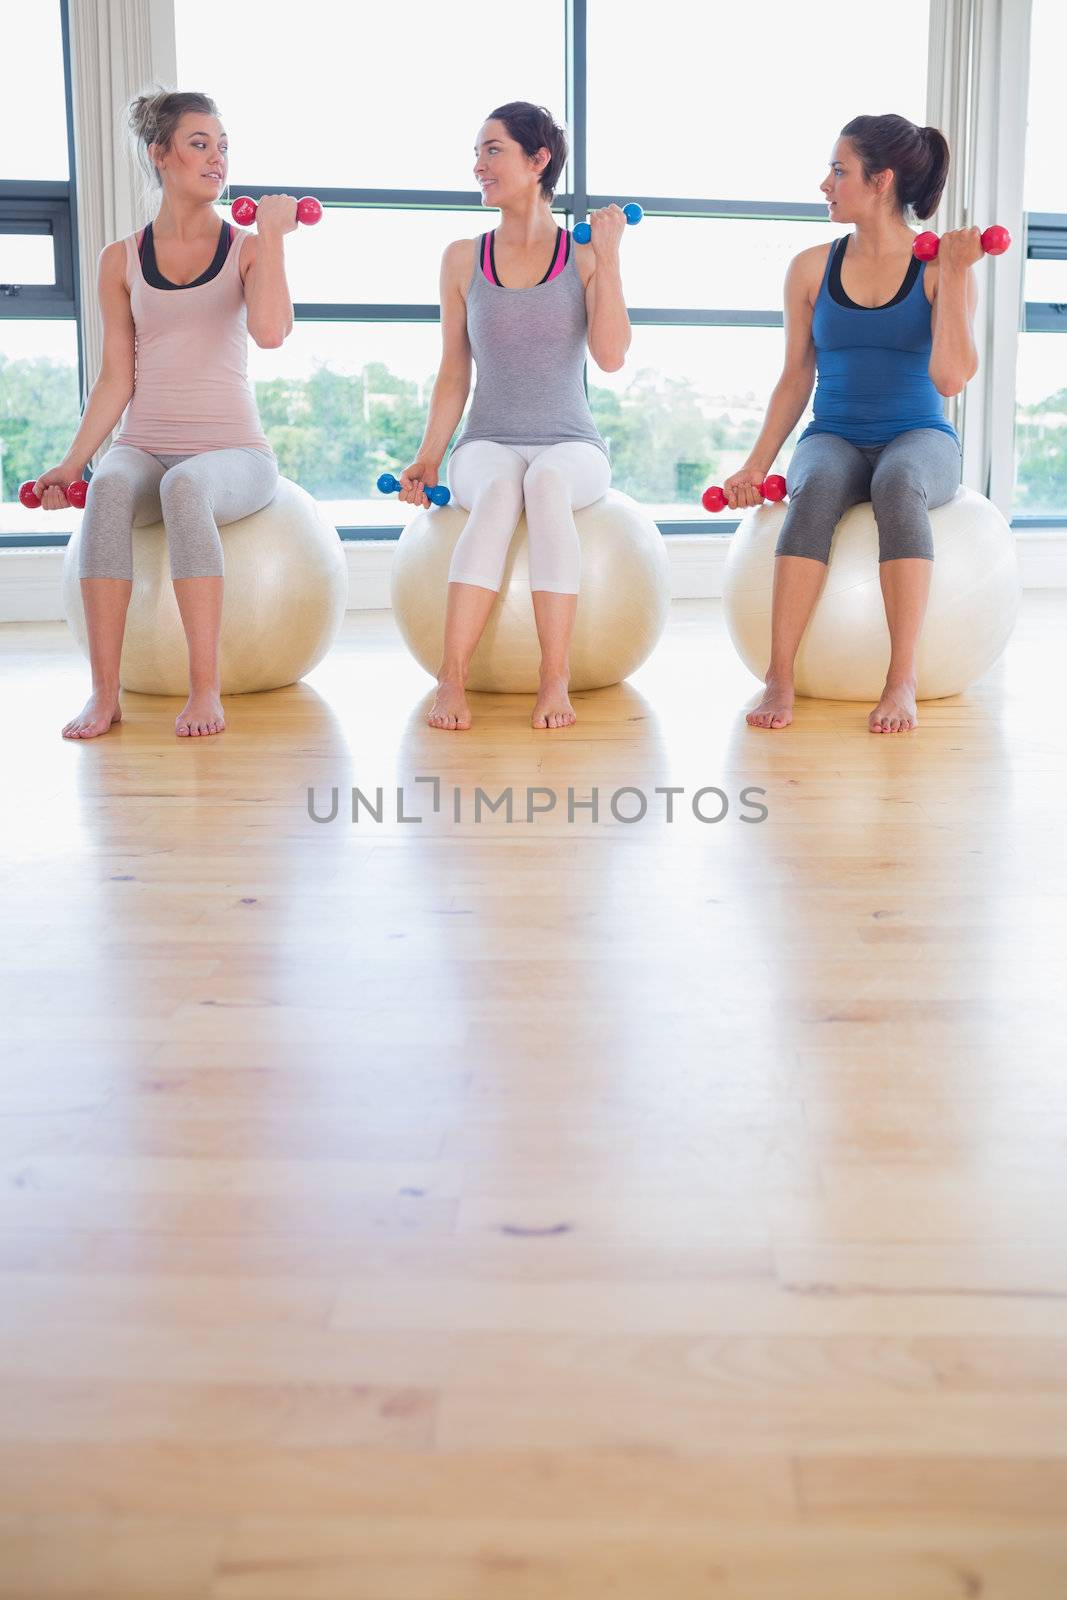 Women lifting weights on exercise balls while talking